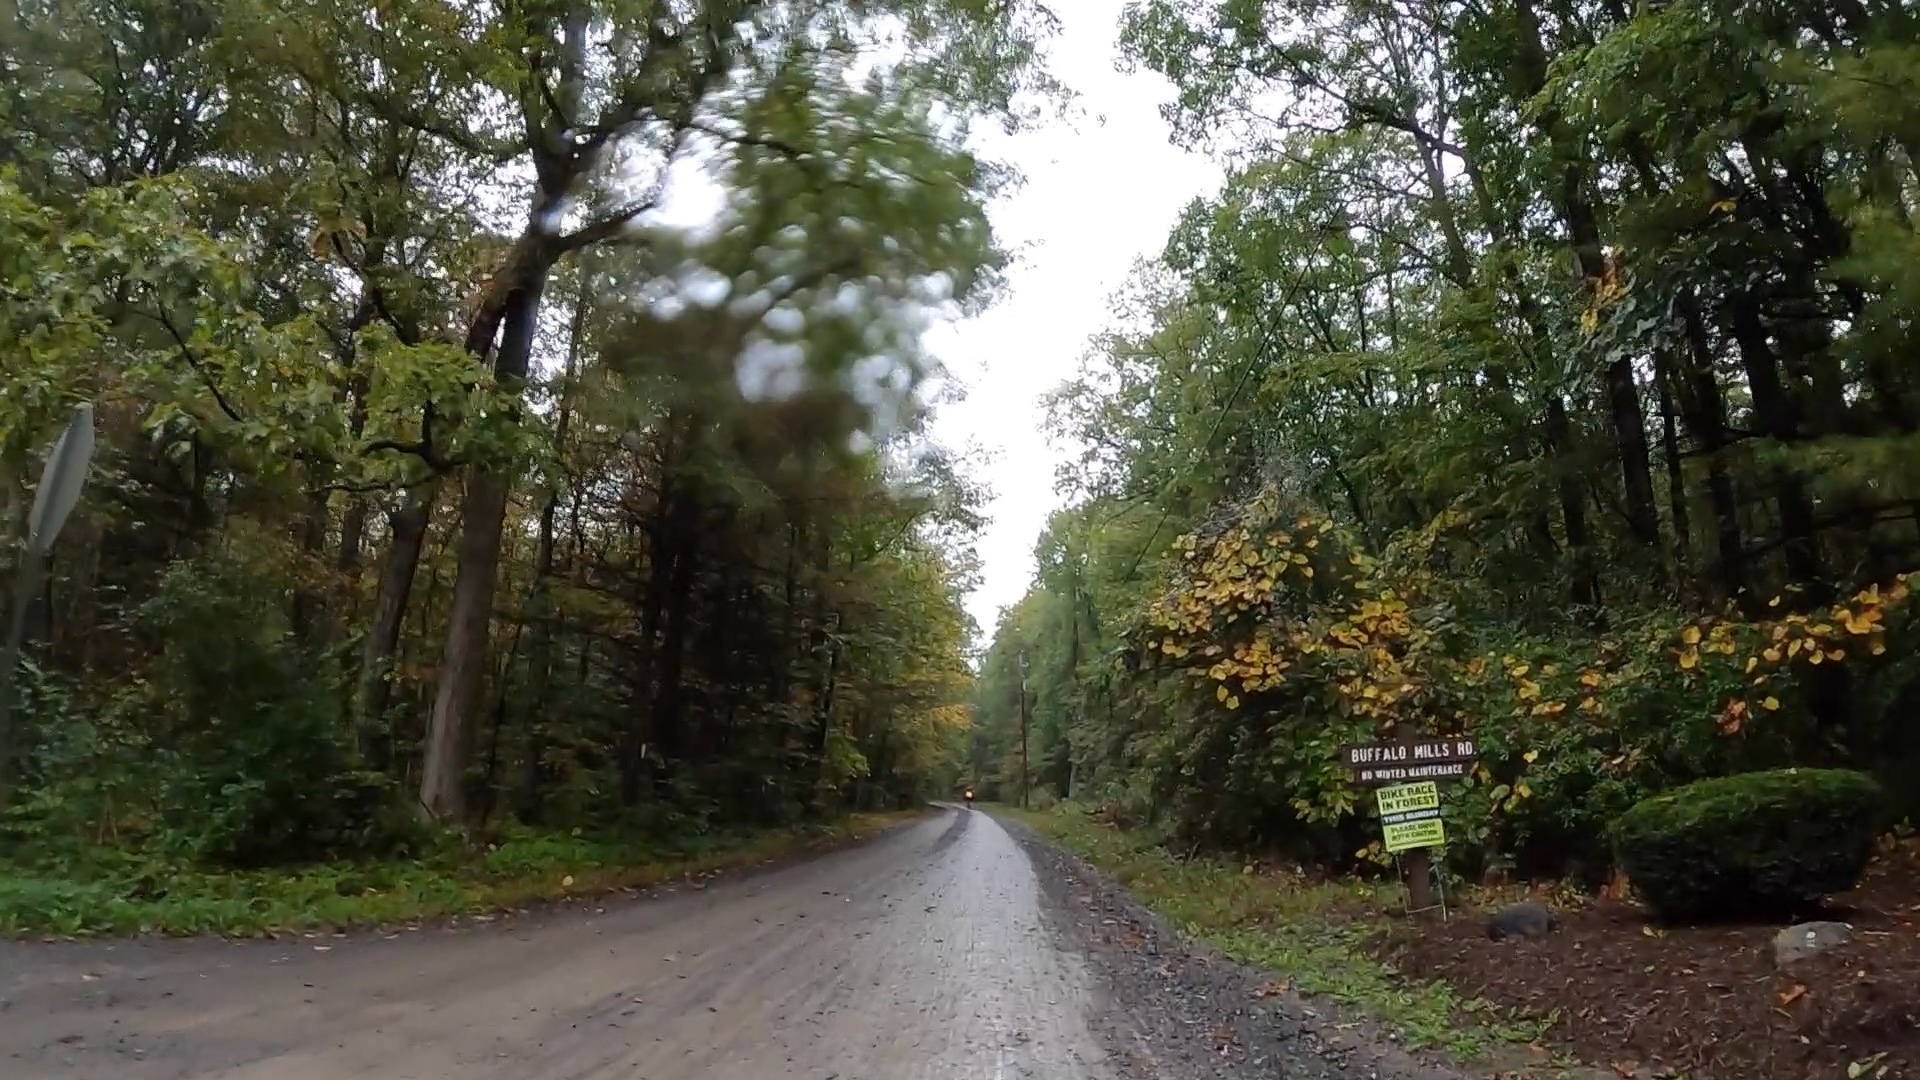 unPAved of the Susquehanna River Valley - 2021 - Entering the Forest